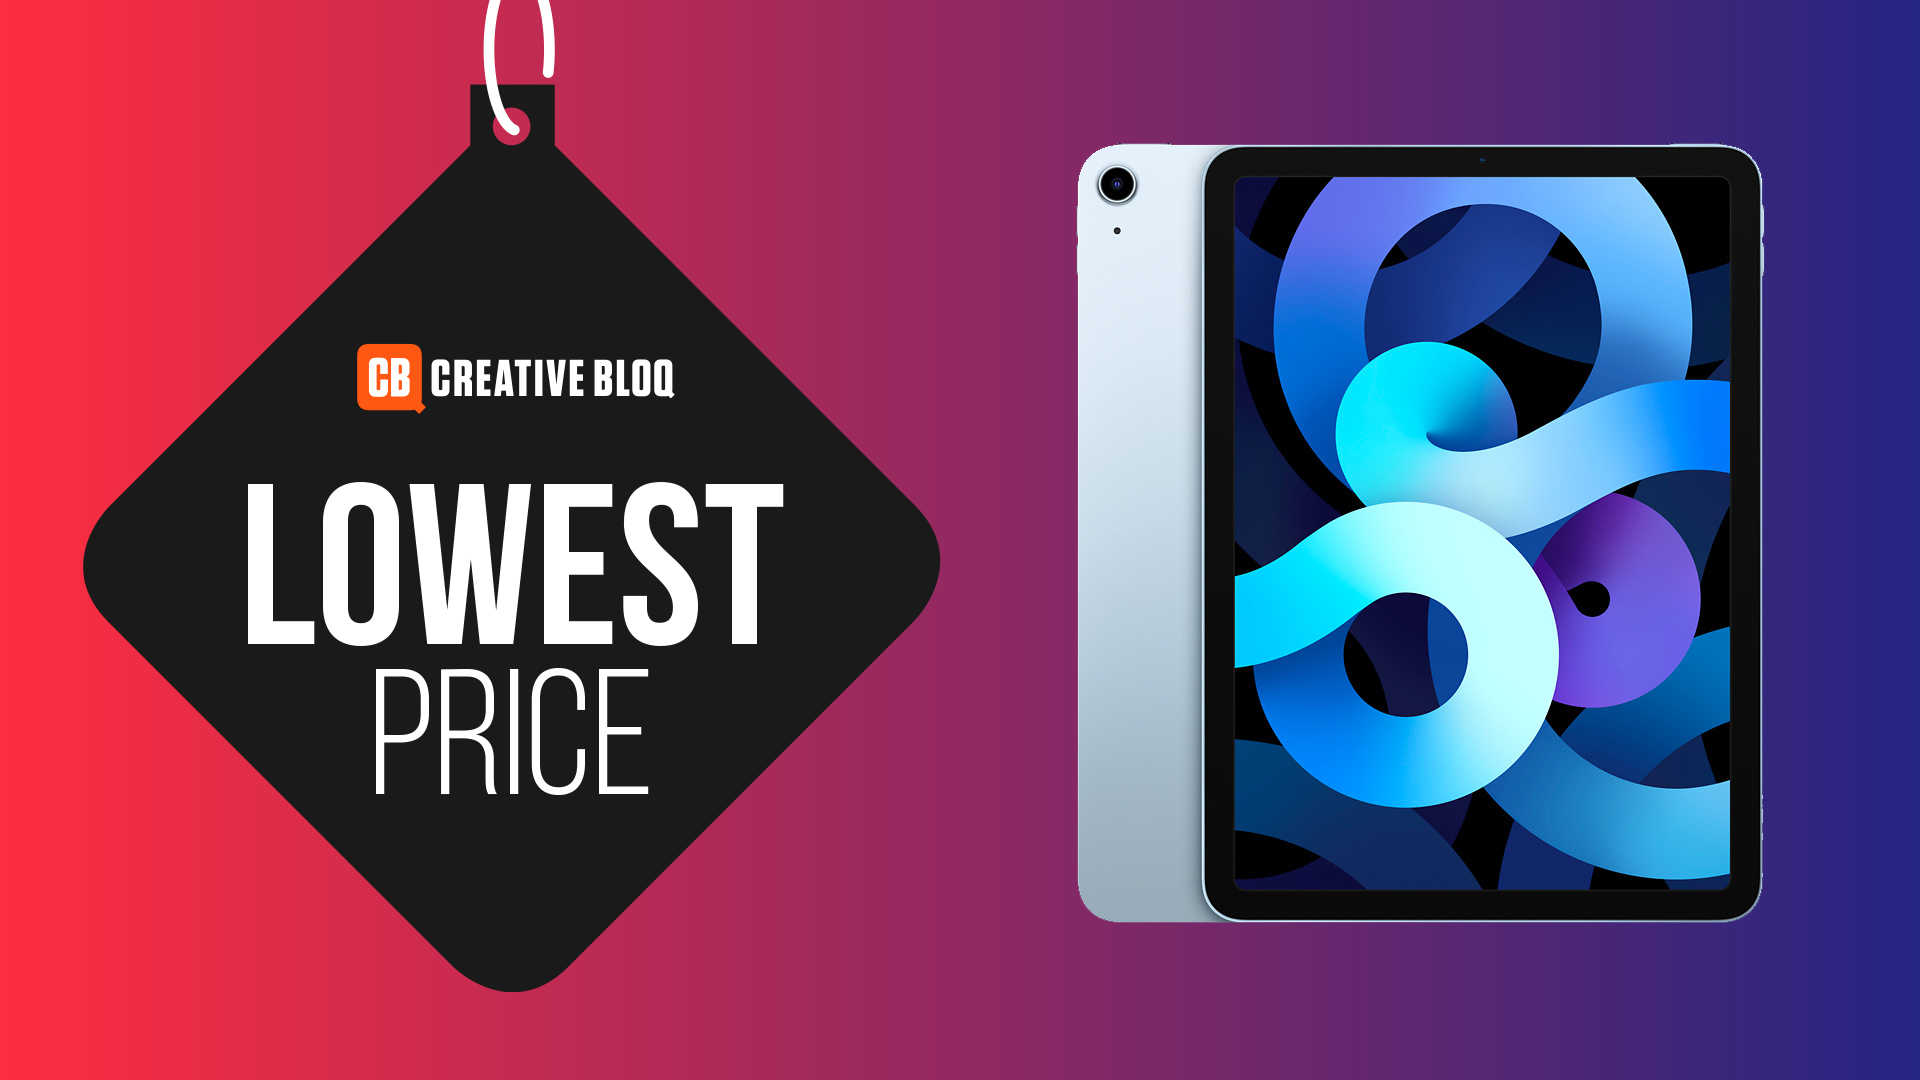 M1 iPad Air offers an unrivaled blend of performance and value at new  better price - PhoneArena